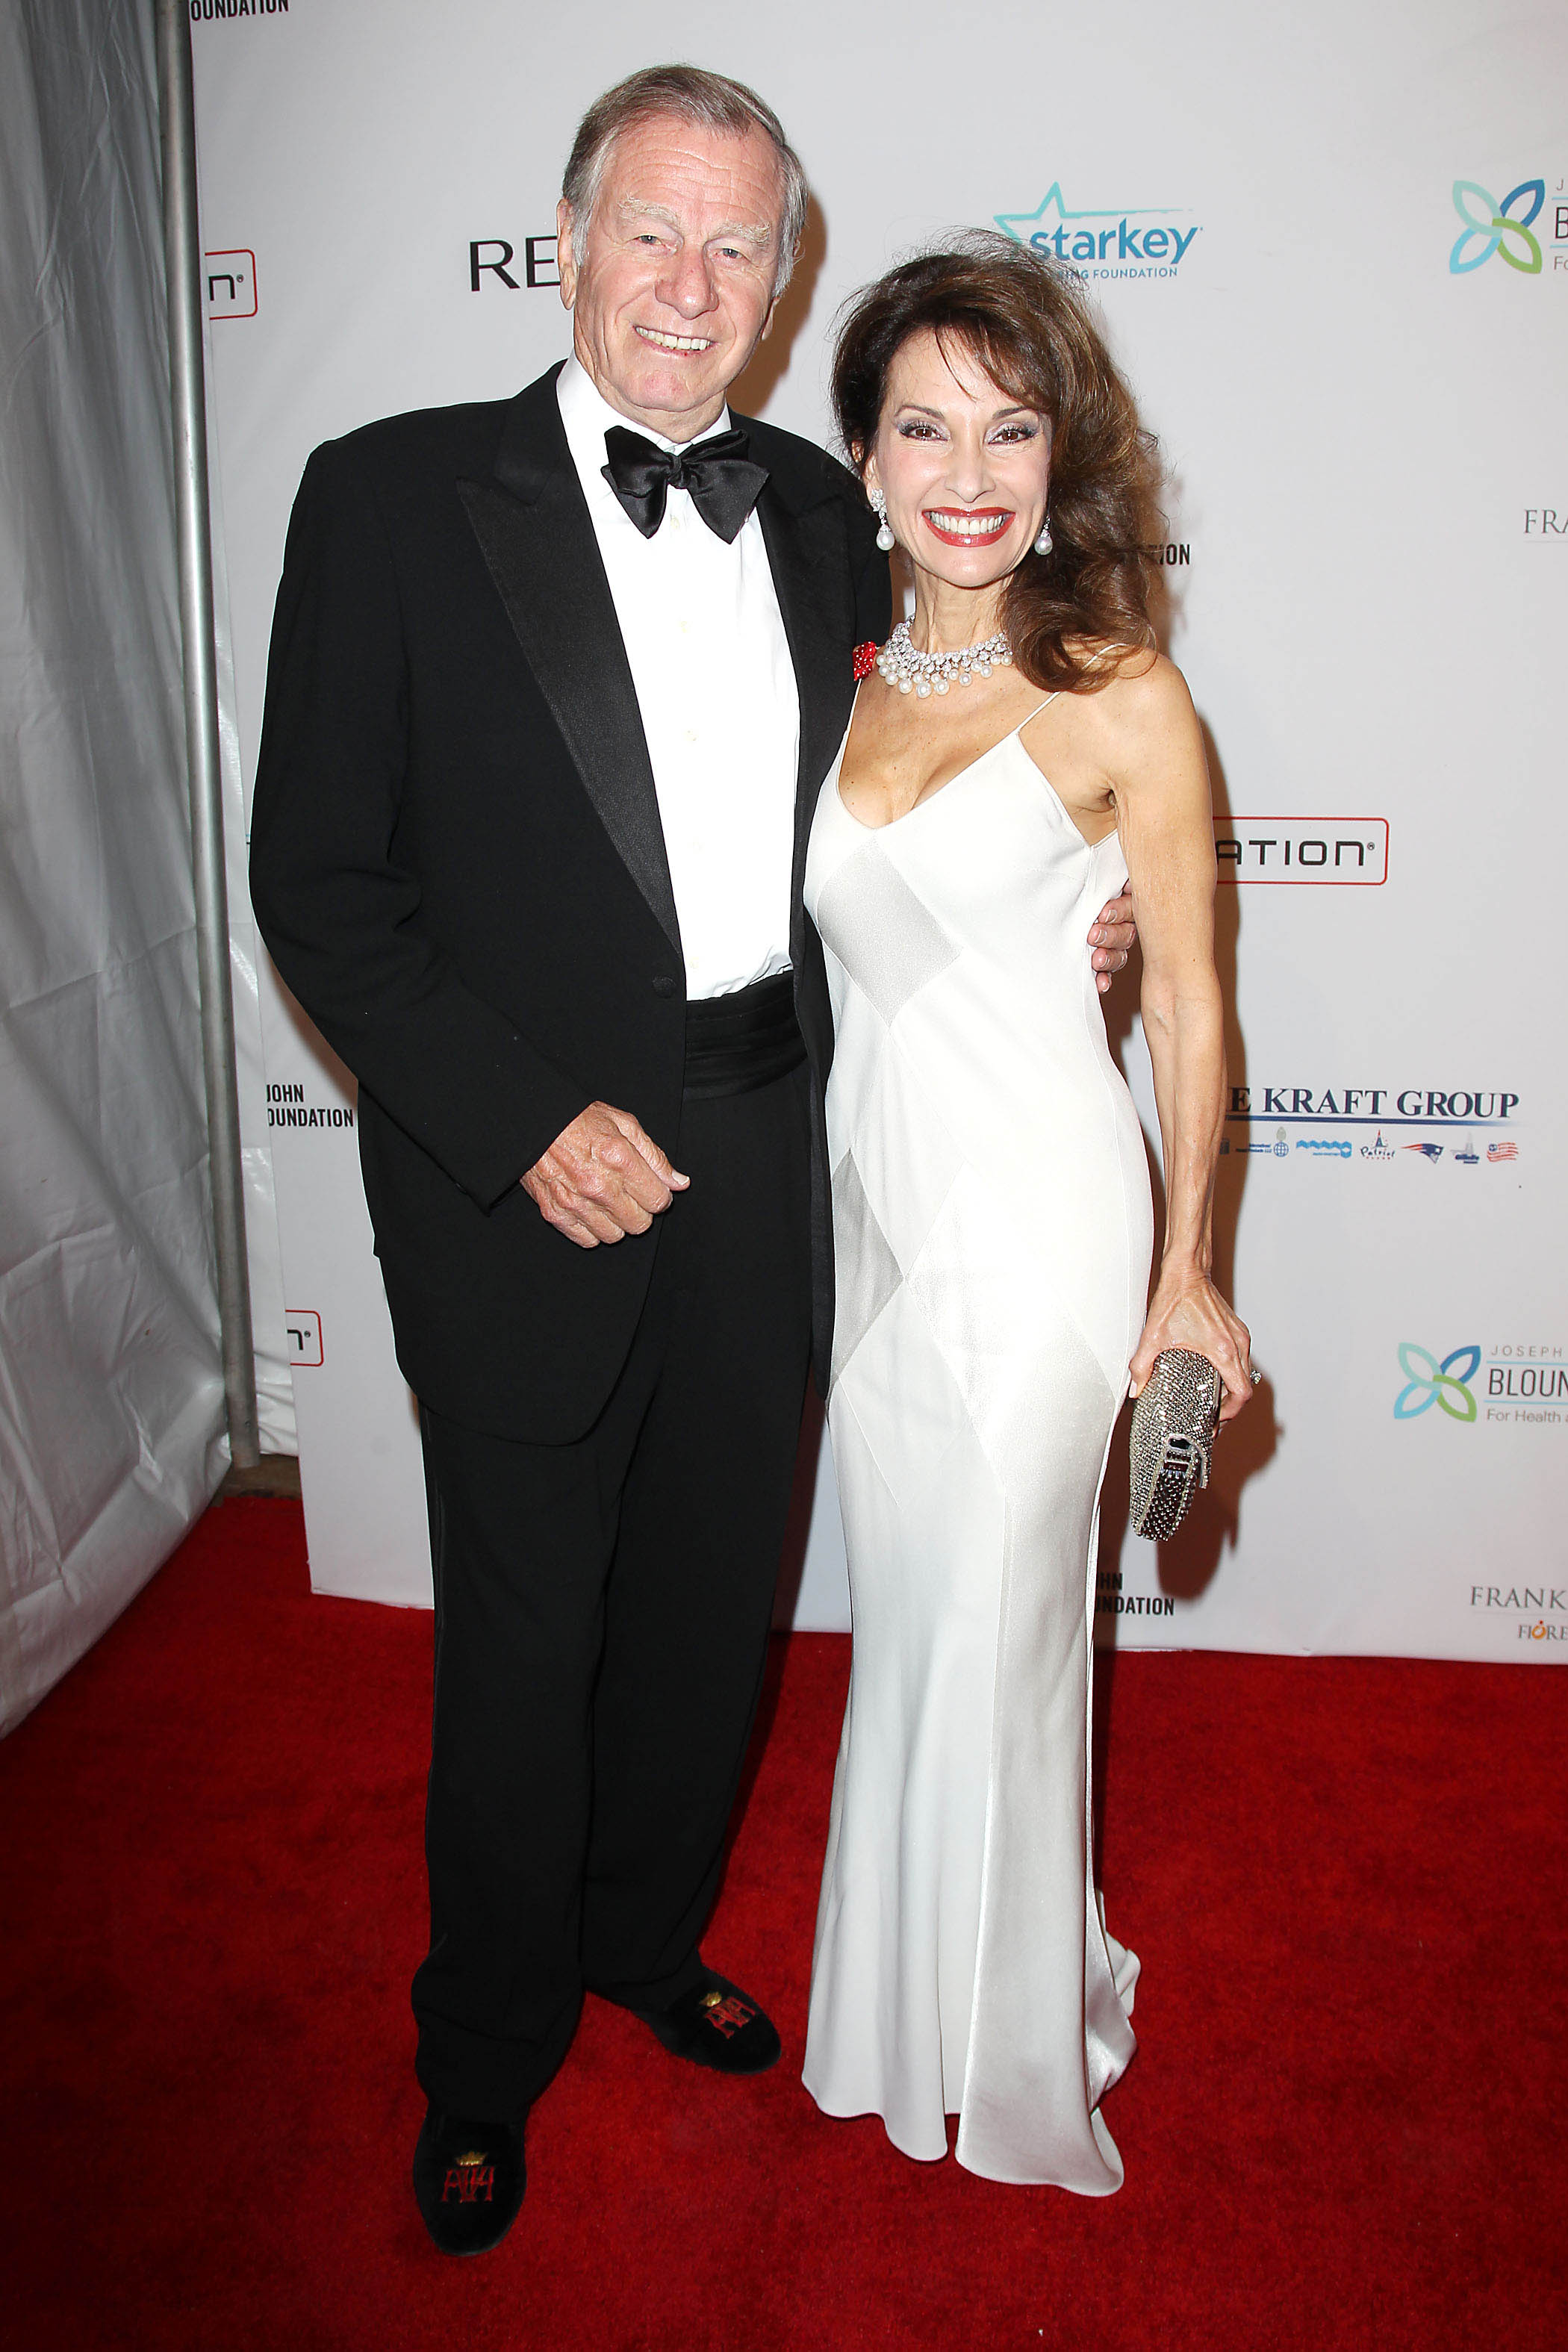 Susan Lucci Urges Women to Prioritize Heart Health 'Guilt-Free'